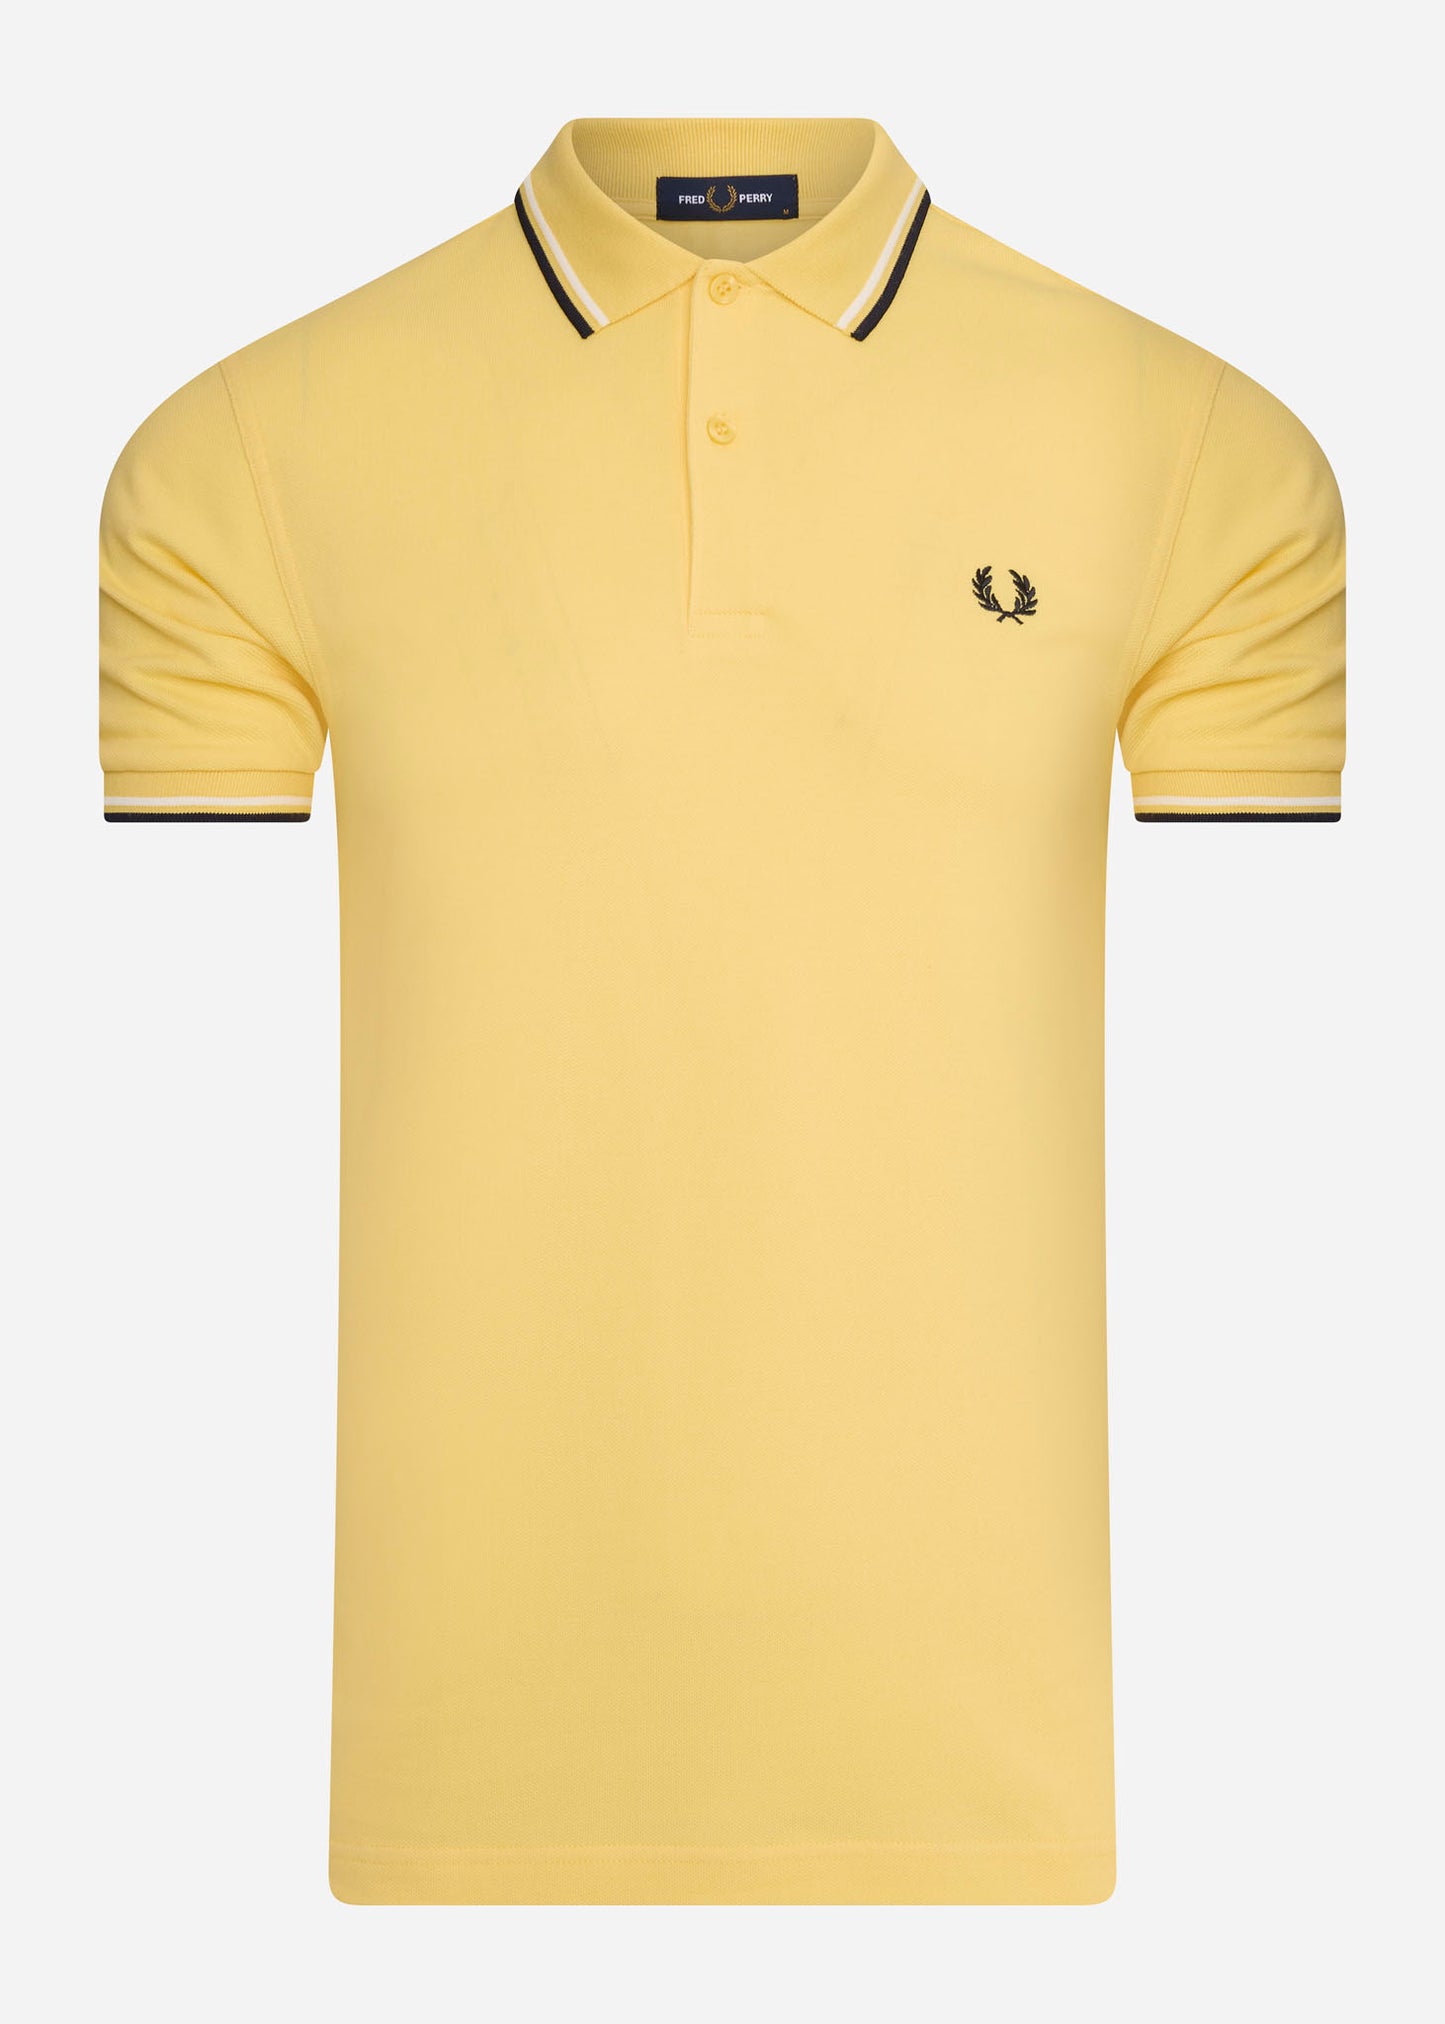 Twin tipped fred perry shirt - 1964 yellow snow white navy